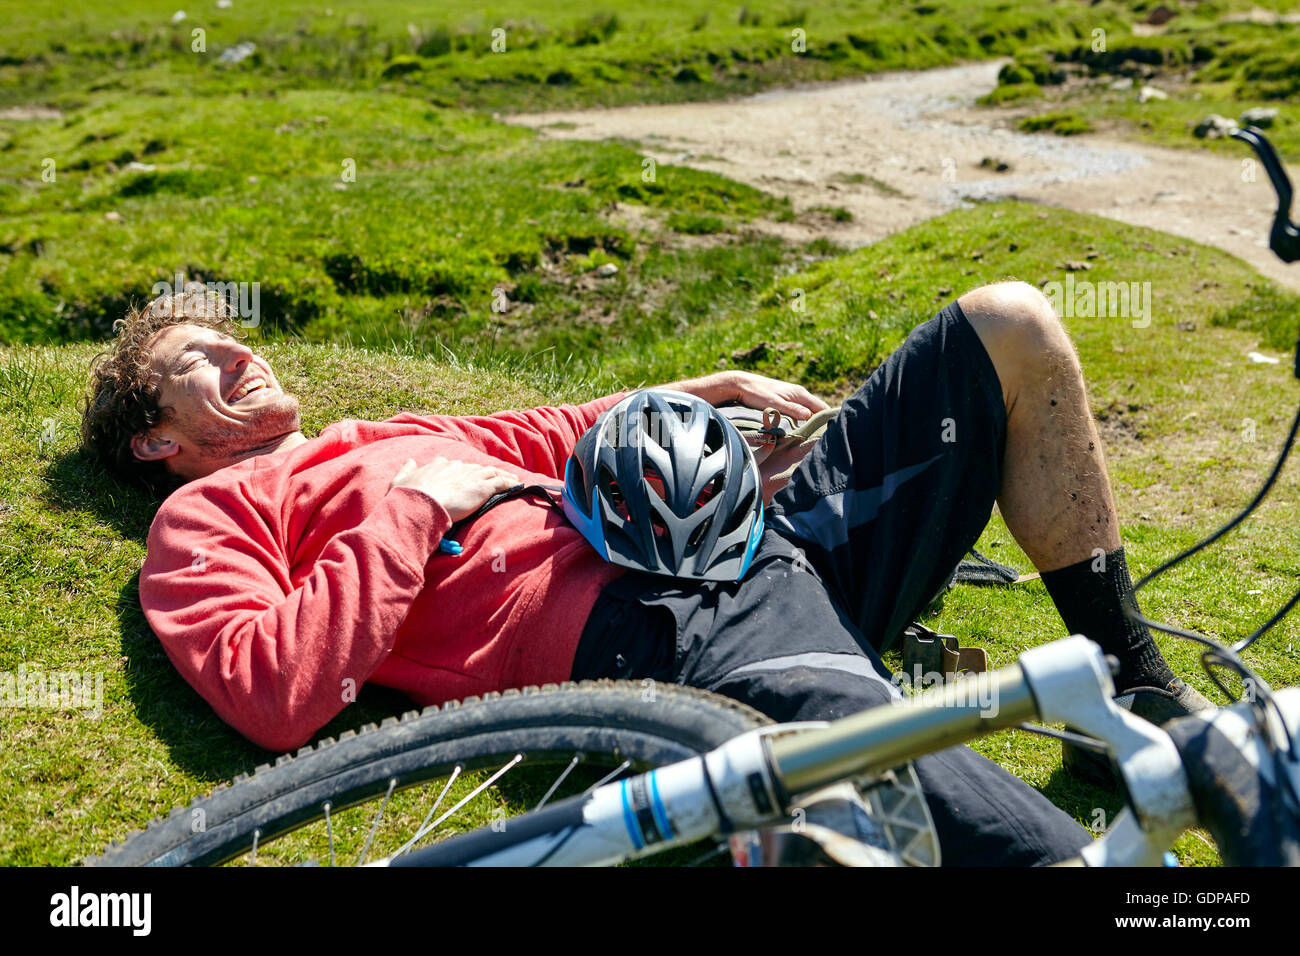 Cyclist lying down on grass by bicycle Stock Photo